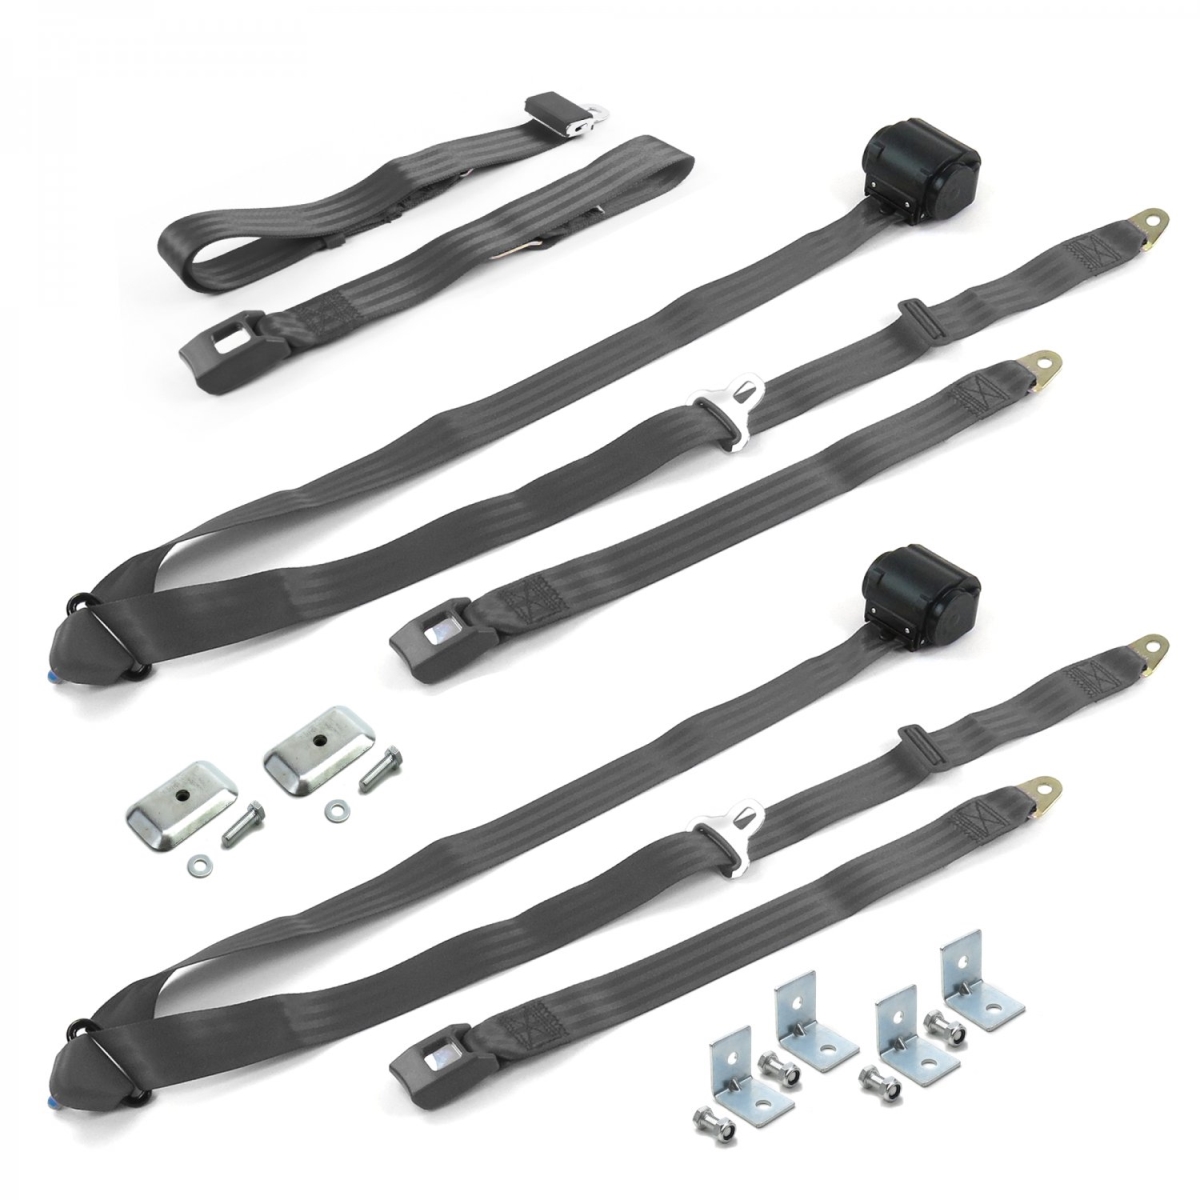 684732 Standard 3 Point Charcoal Retractable Bench Seat Belt Kit with Bracketry for Desoto 1946-1961 - 3 Belts -  safeTboy